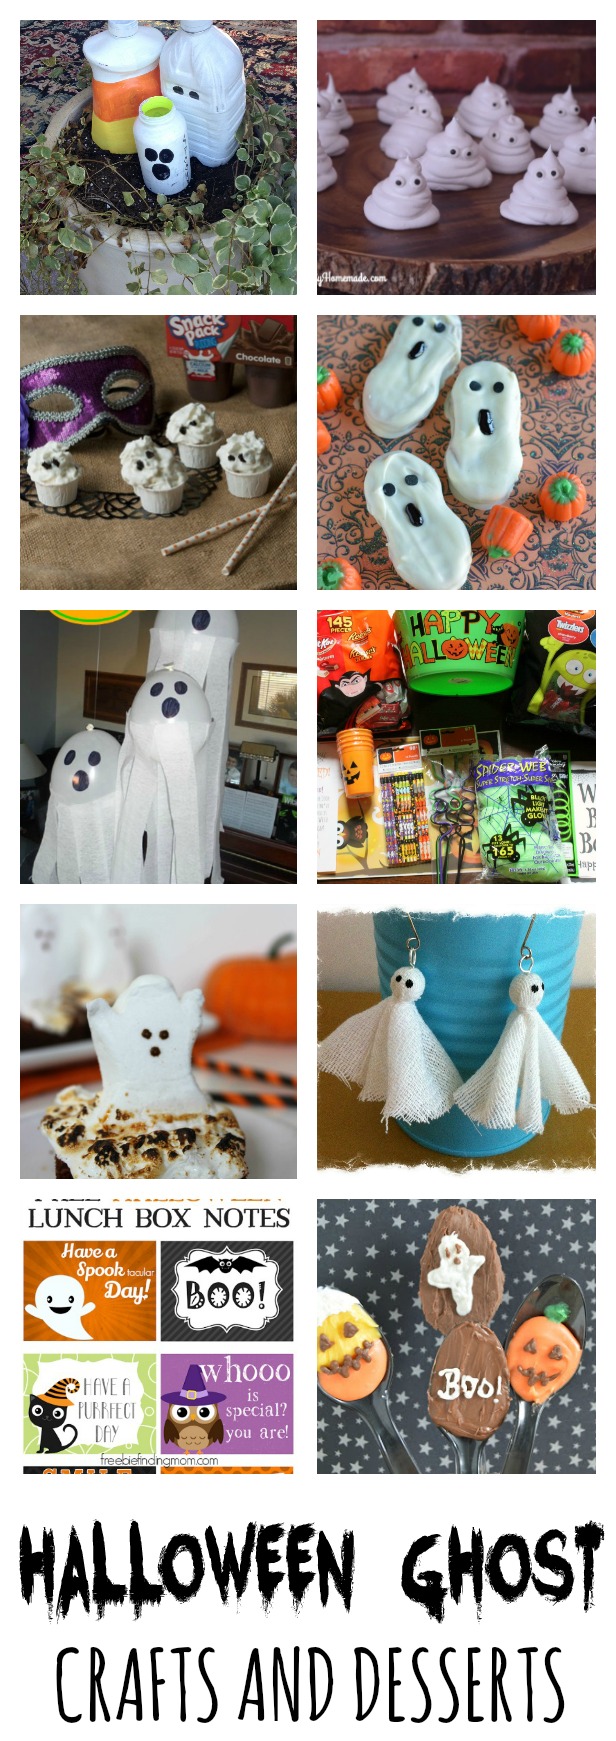 Halloween Ghost Crafts and Desserts! Simple and fun Halloween ghost ideas.